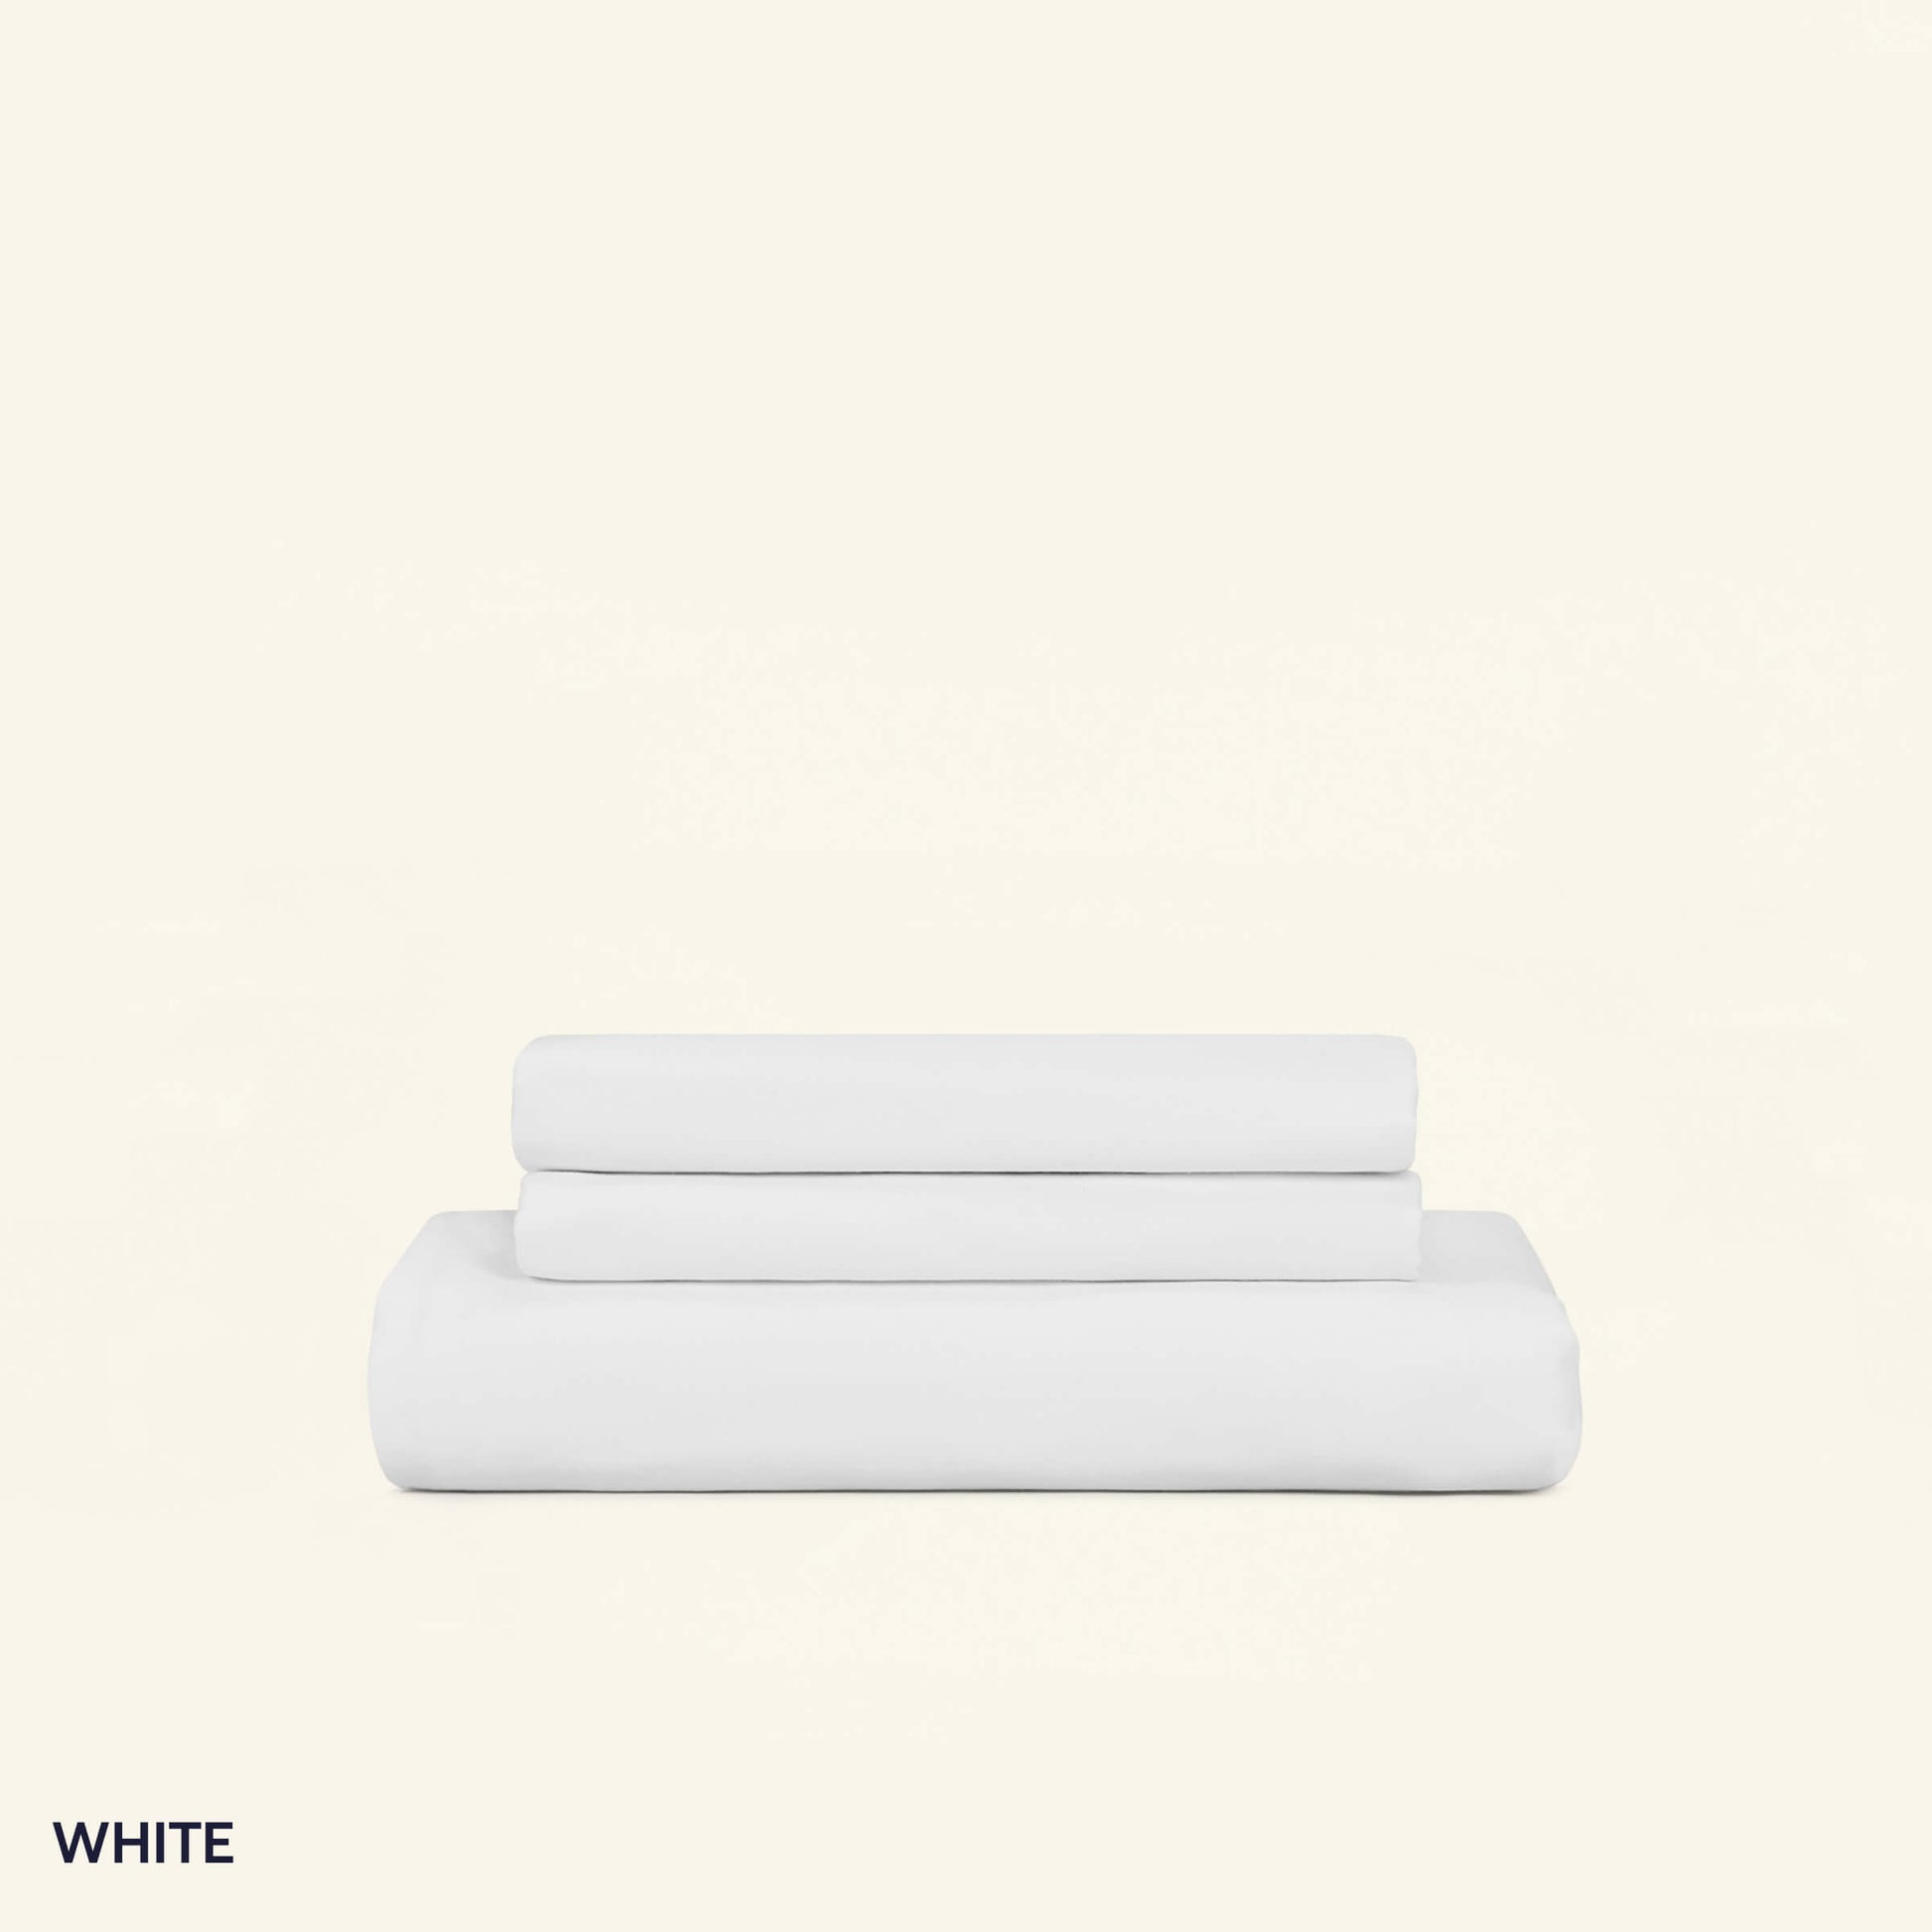 The Slumber Cloud Essential Sheet Set made with temperature regulation technology in white